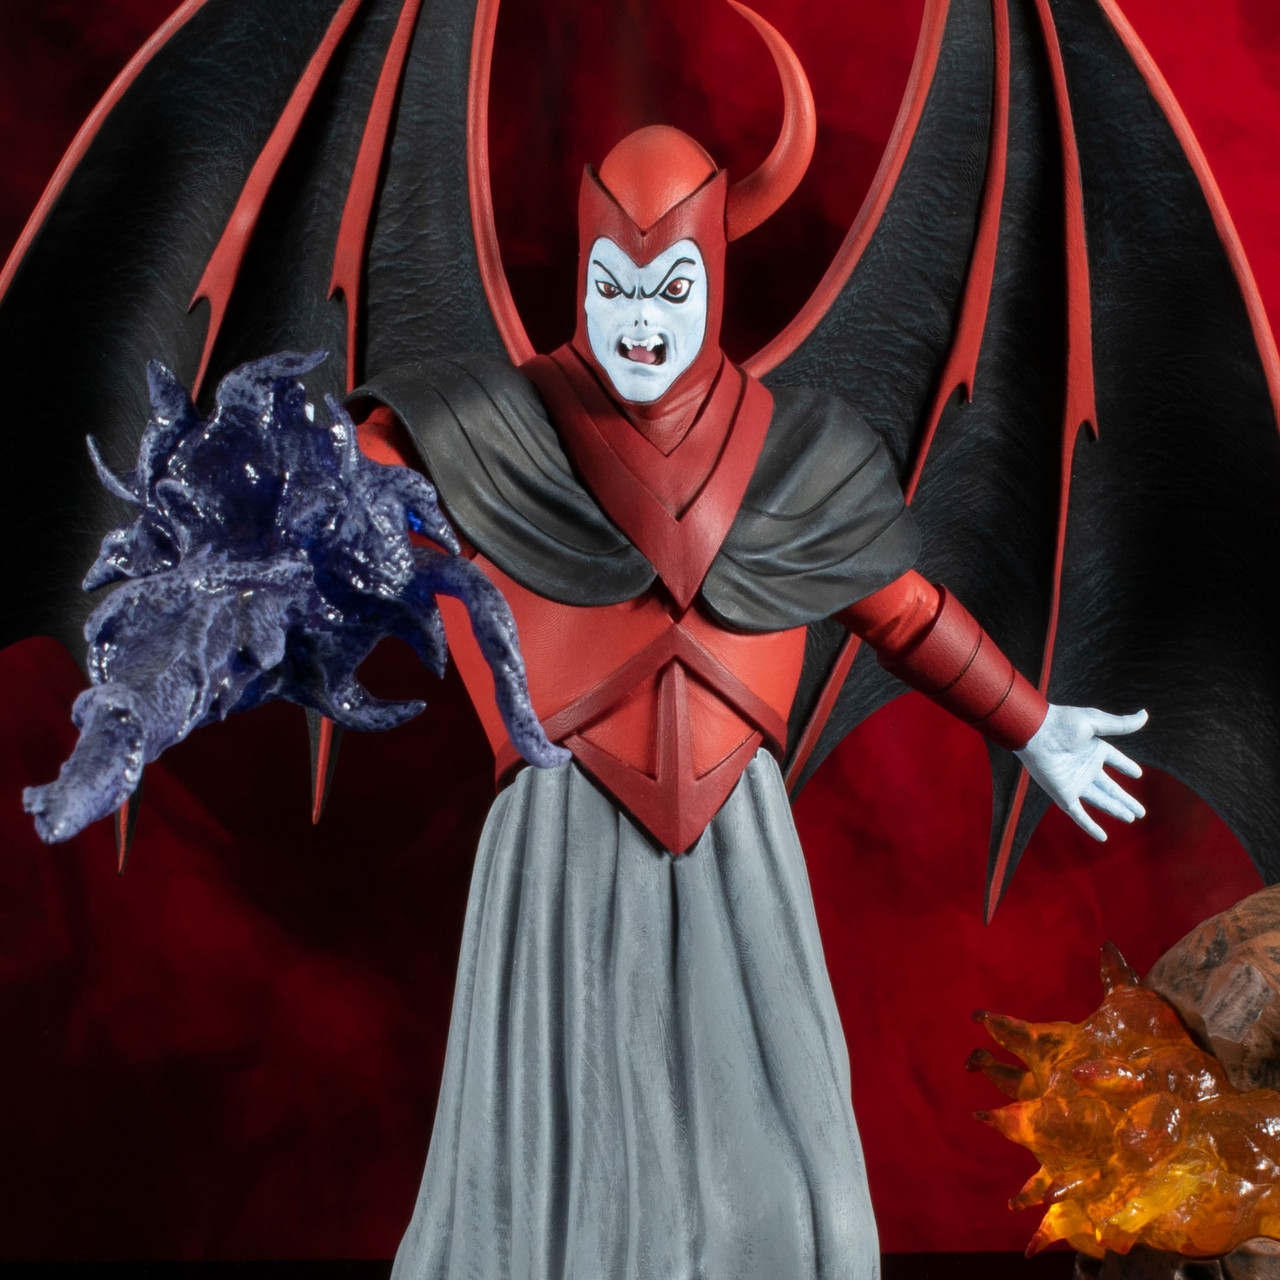 Dungeons & Dragons Animated Venger Gallery Statue